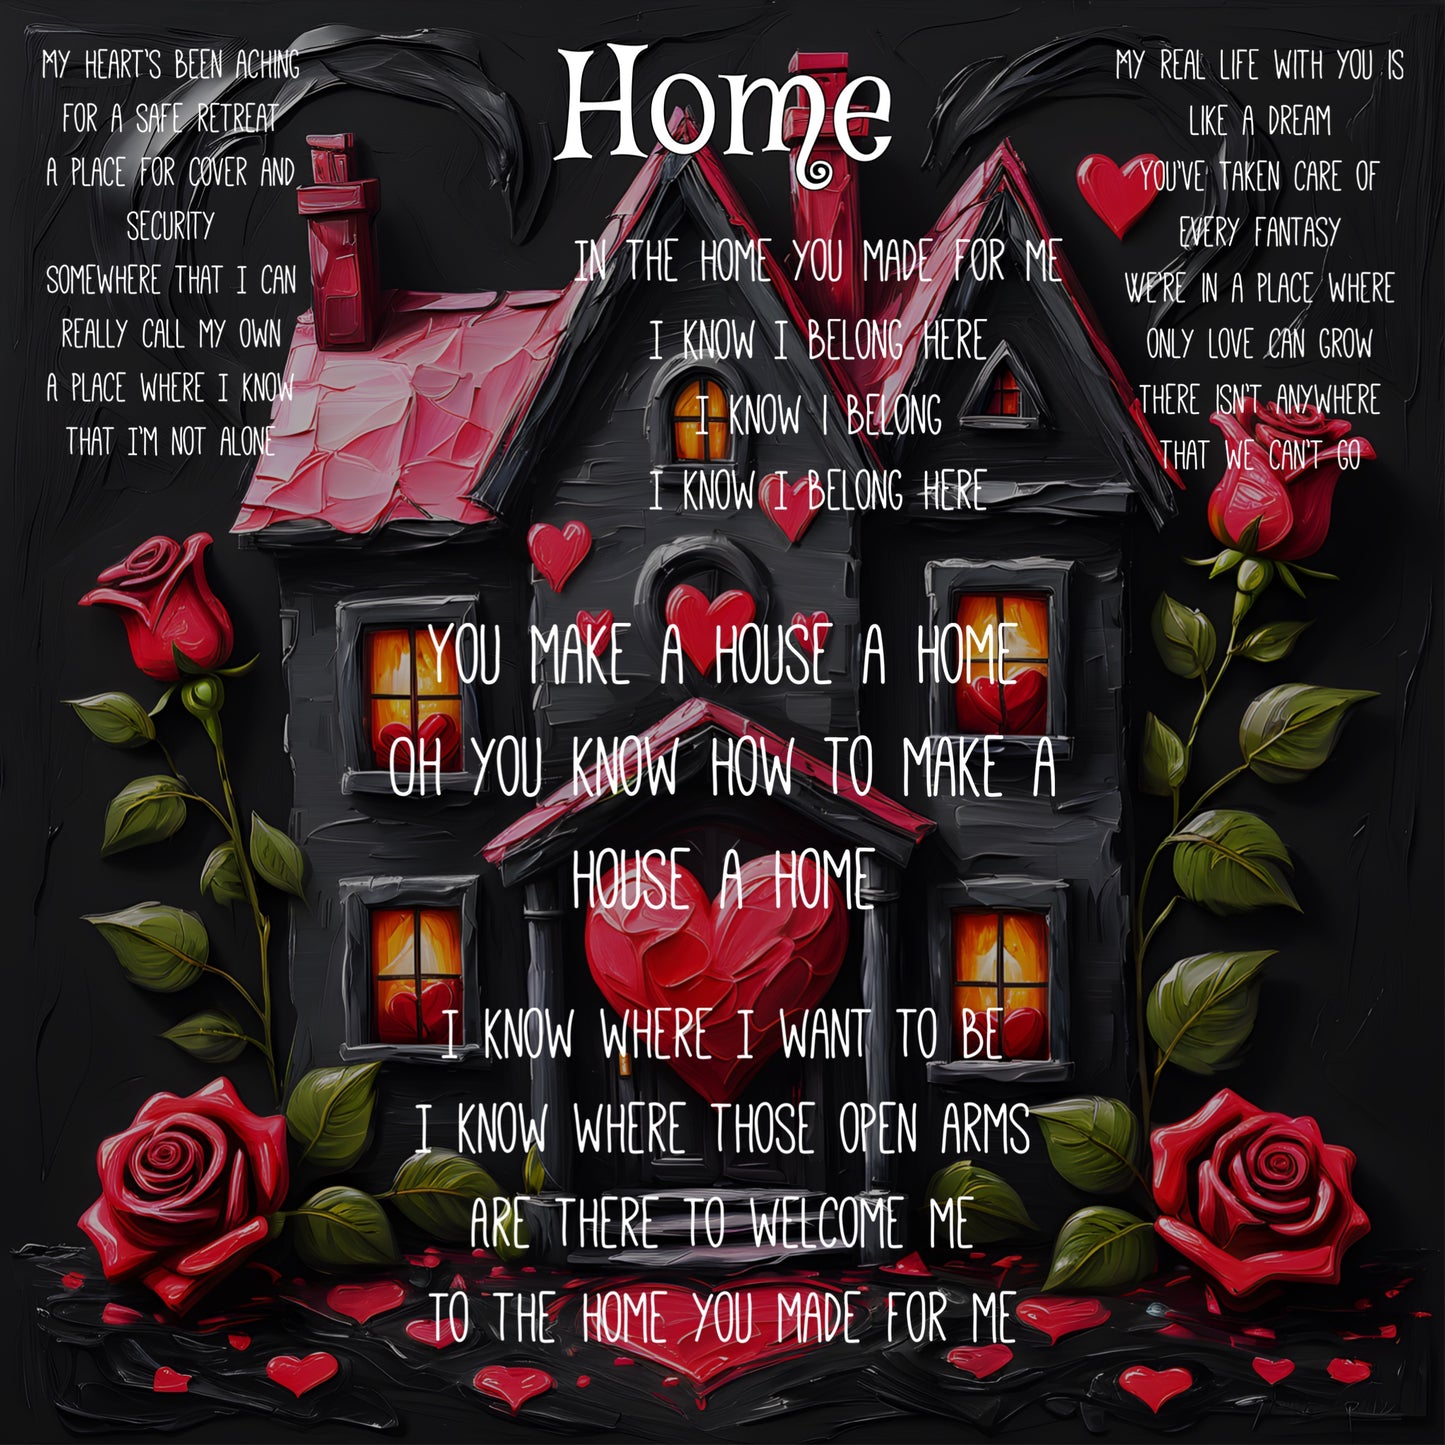 Signed “Home” Lyric Poster